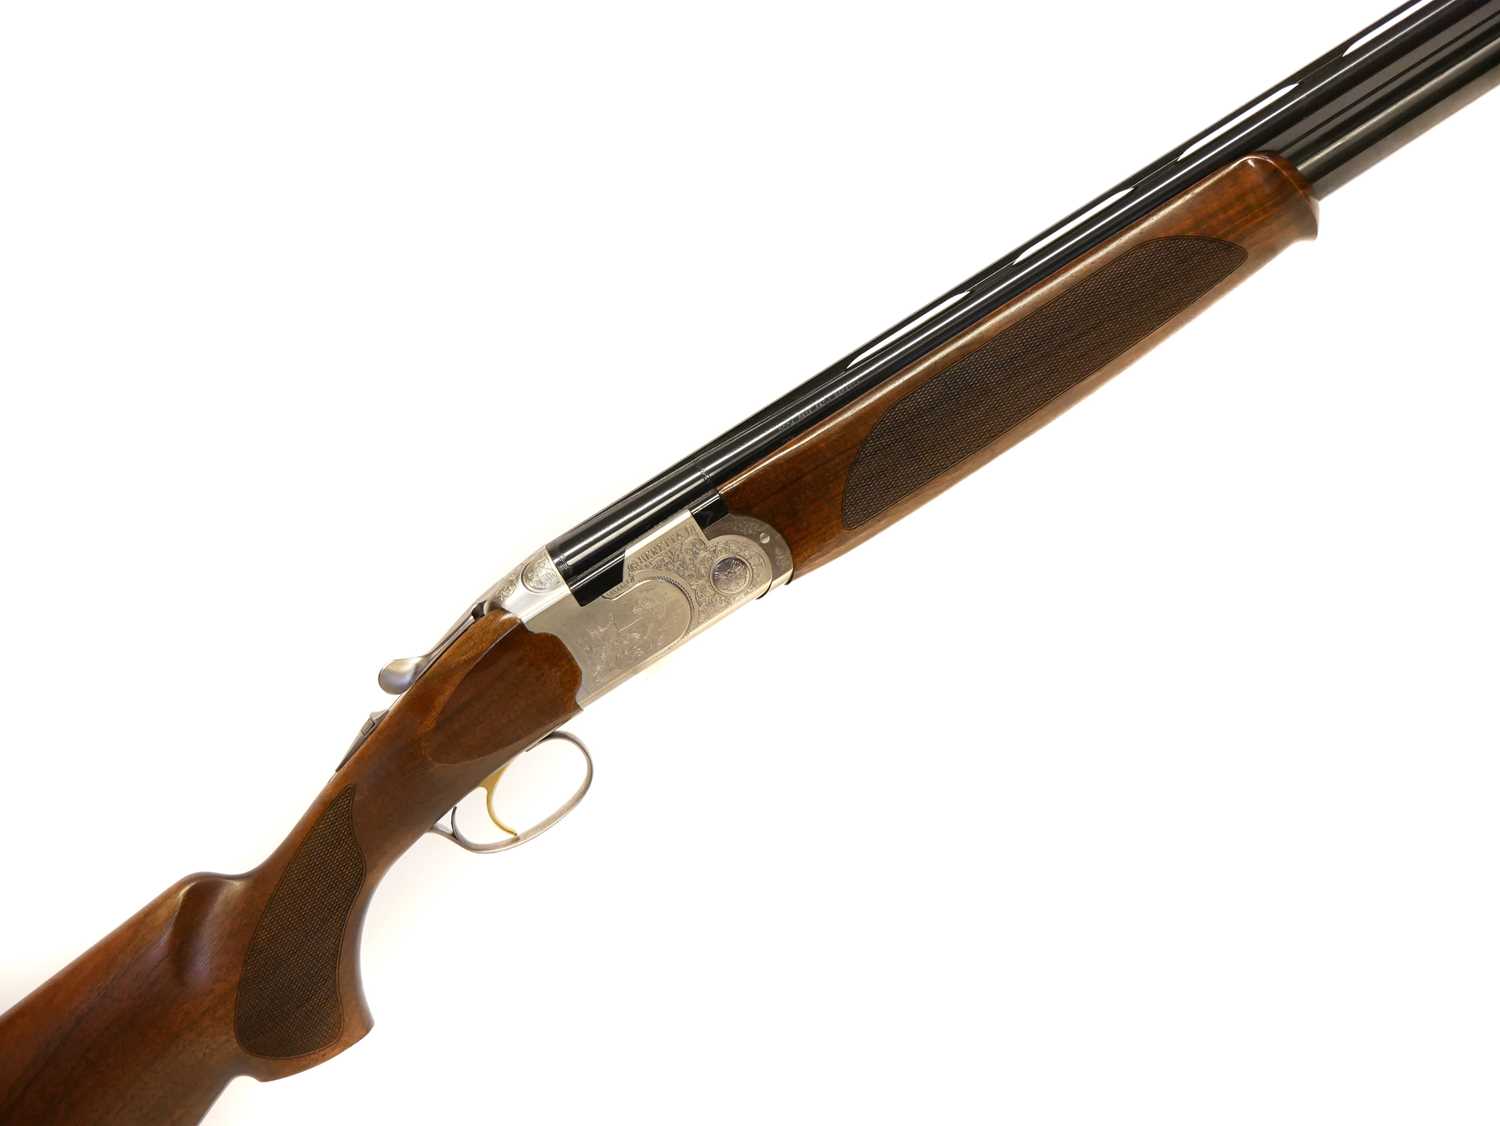 Lot 257 - Beretta 687 Silver Pigeon III 12 bore over and under shotgun LICENCE REQUIRED